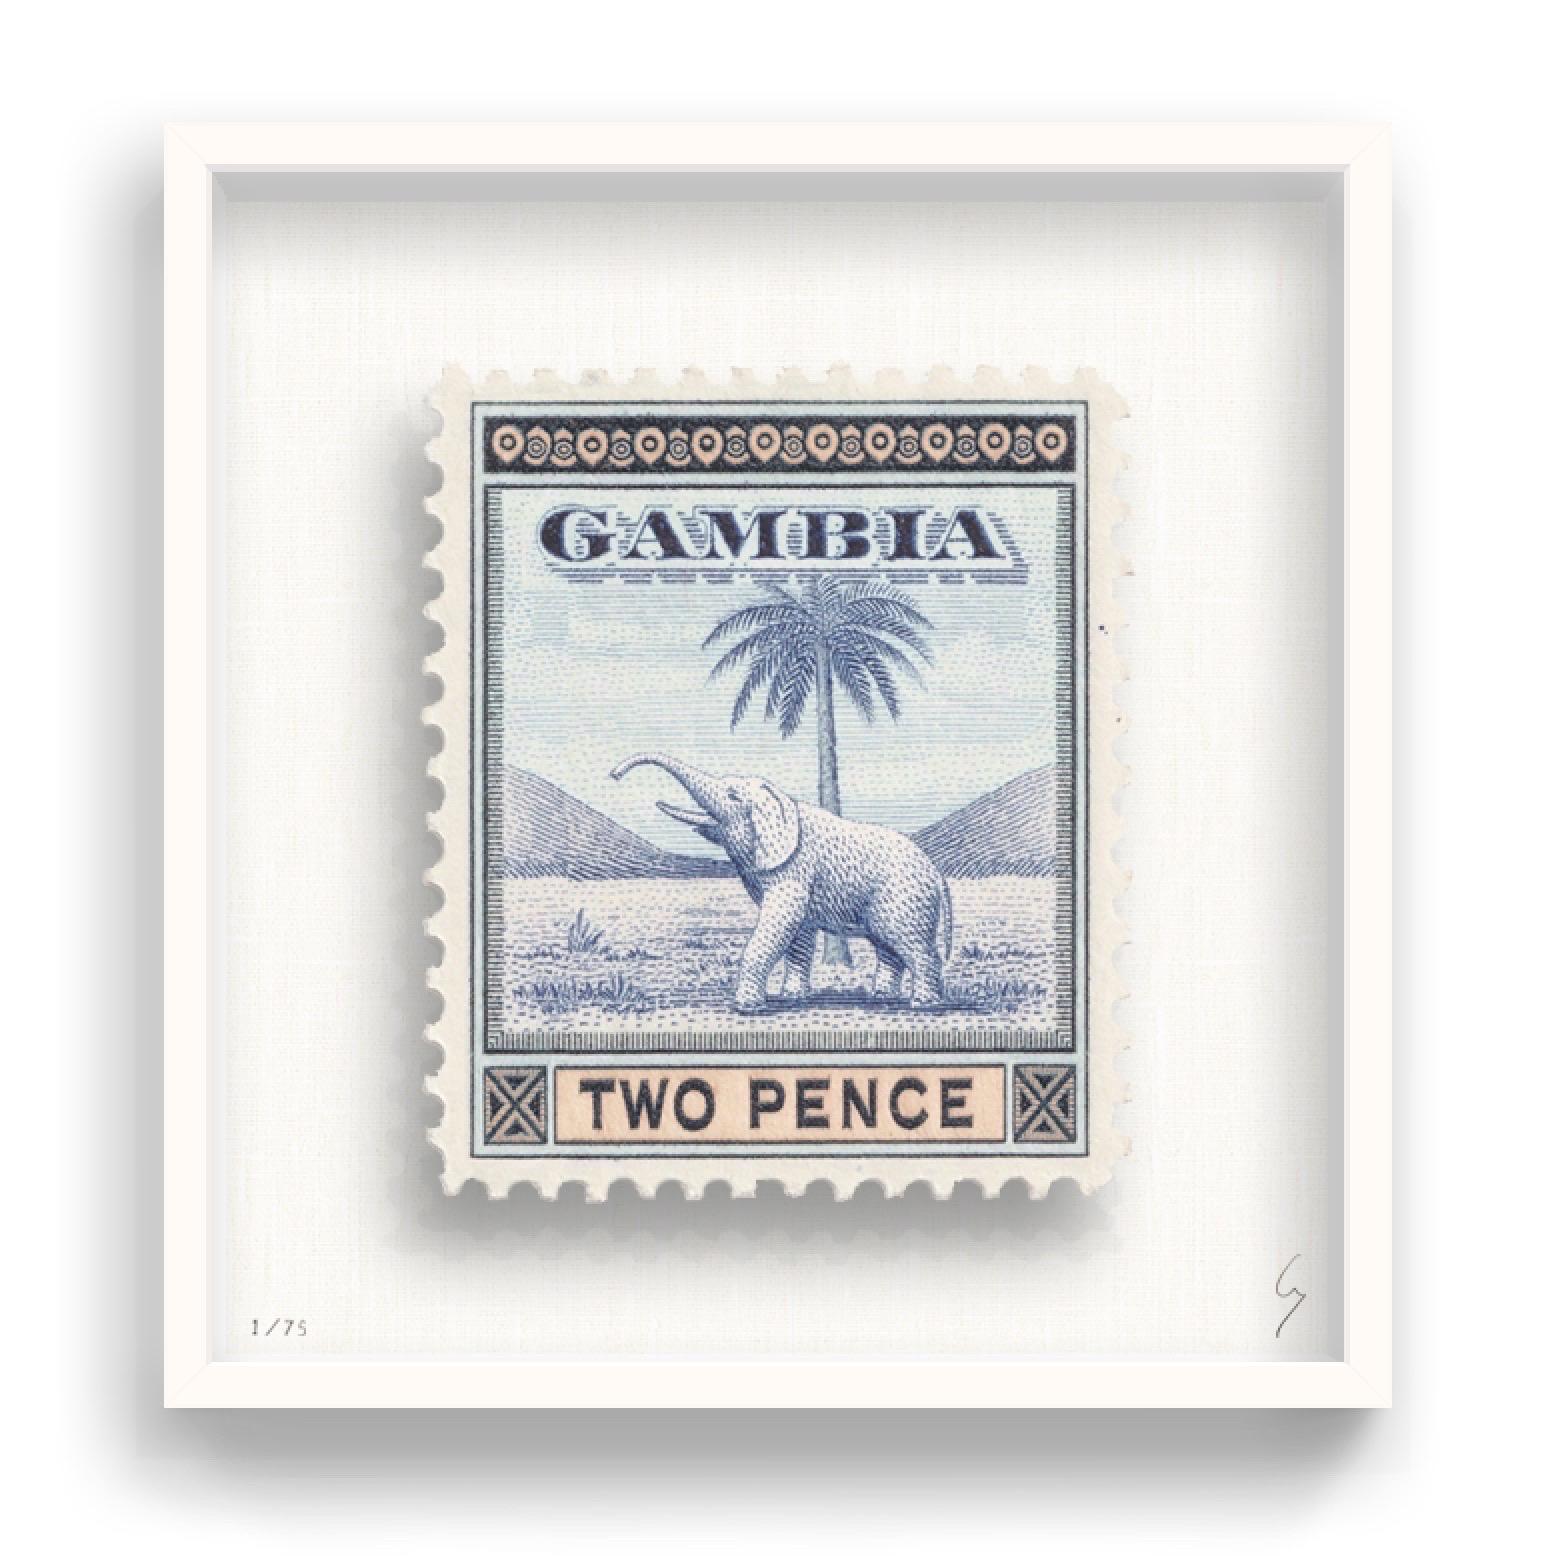 Guy Gee, Gambia (medium)

Hand-engraved print on 350gsm on G.F Smith card
53 x 56cm (20 4/5 x 22 2/5 in)
Frame included 
Edition of 75 

Each artwork by Guy had been digitally reimagined from an original postage stamp. Cut out and finished by hand,